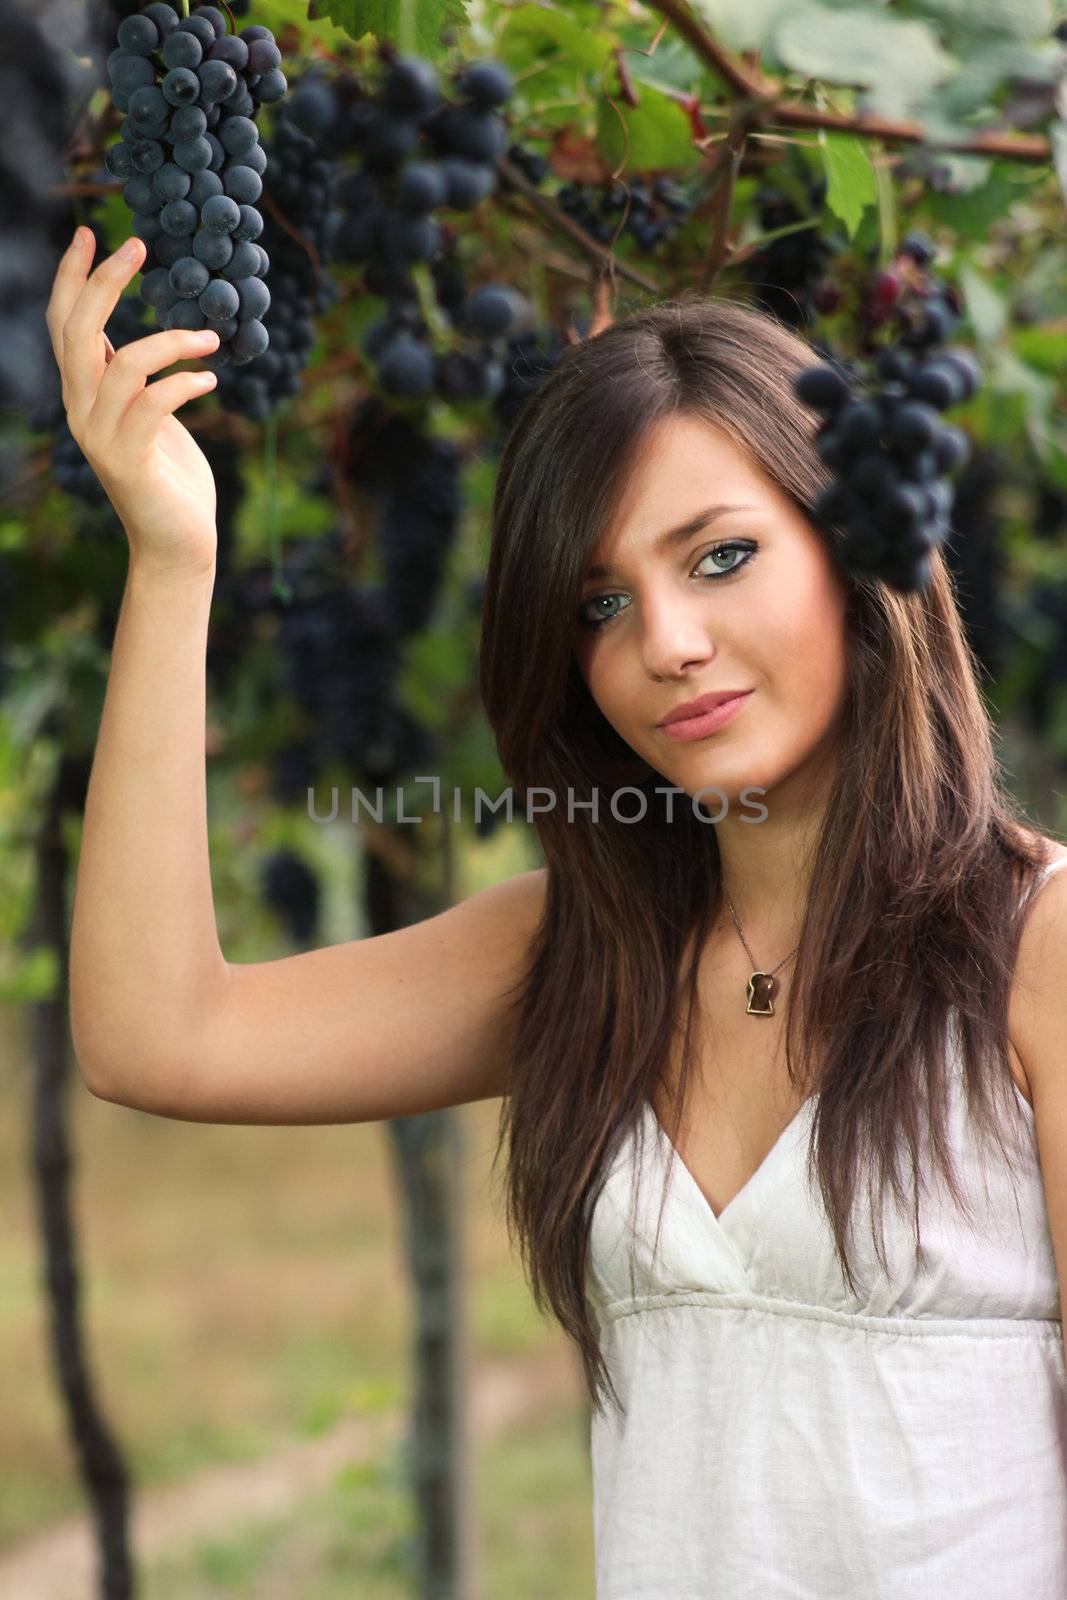 Beautiful young girl picking grapes by captblack76